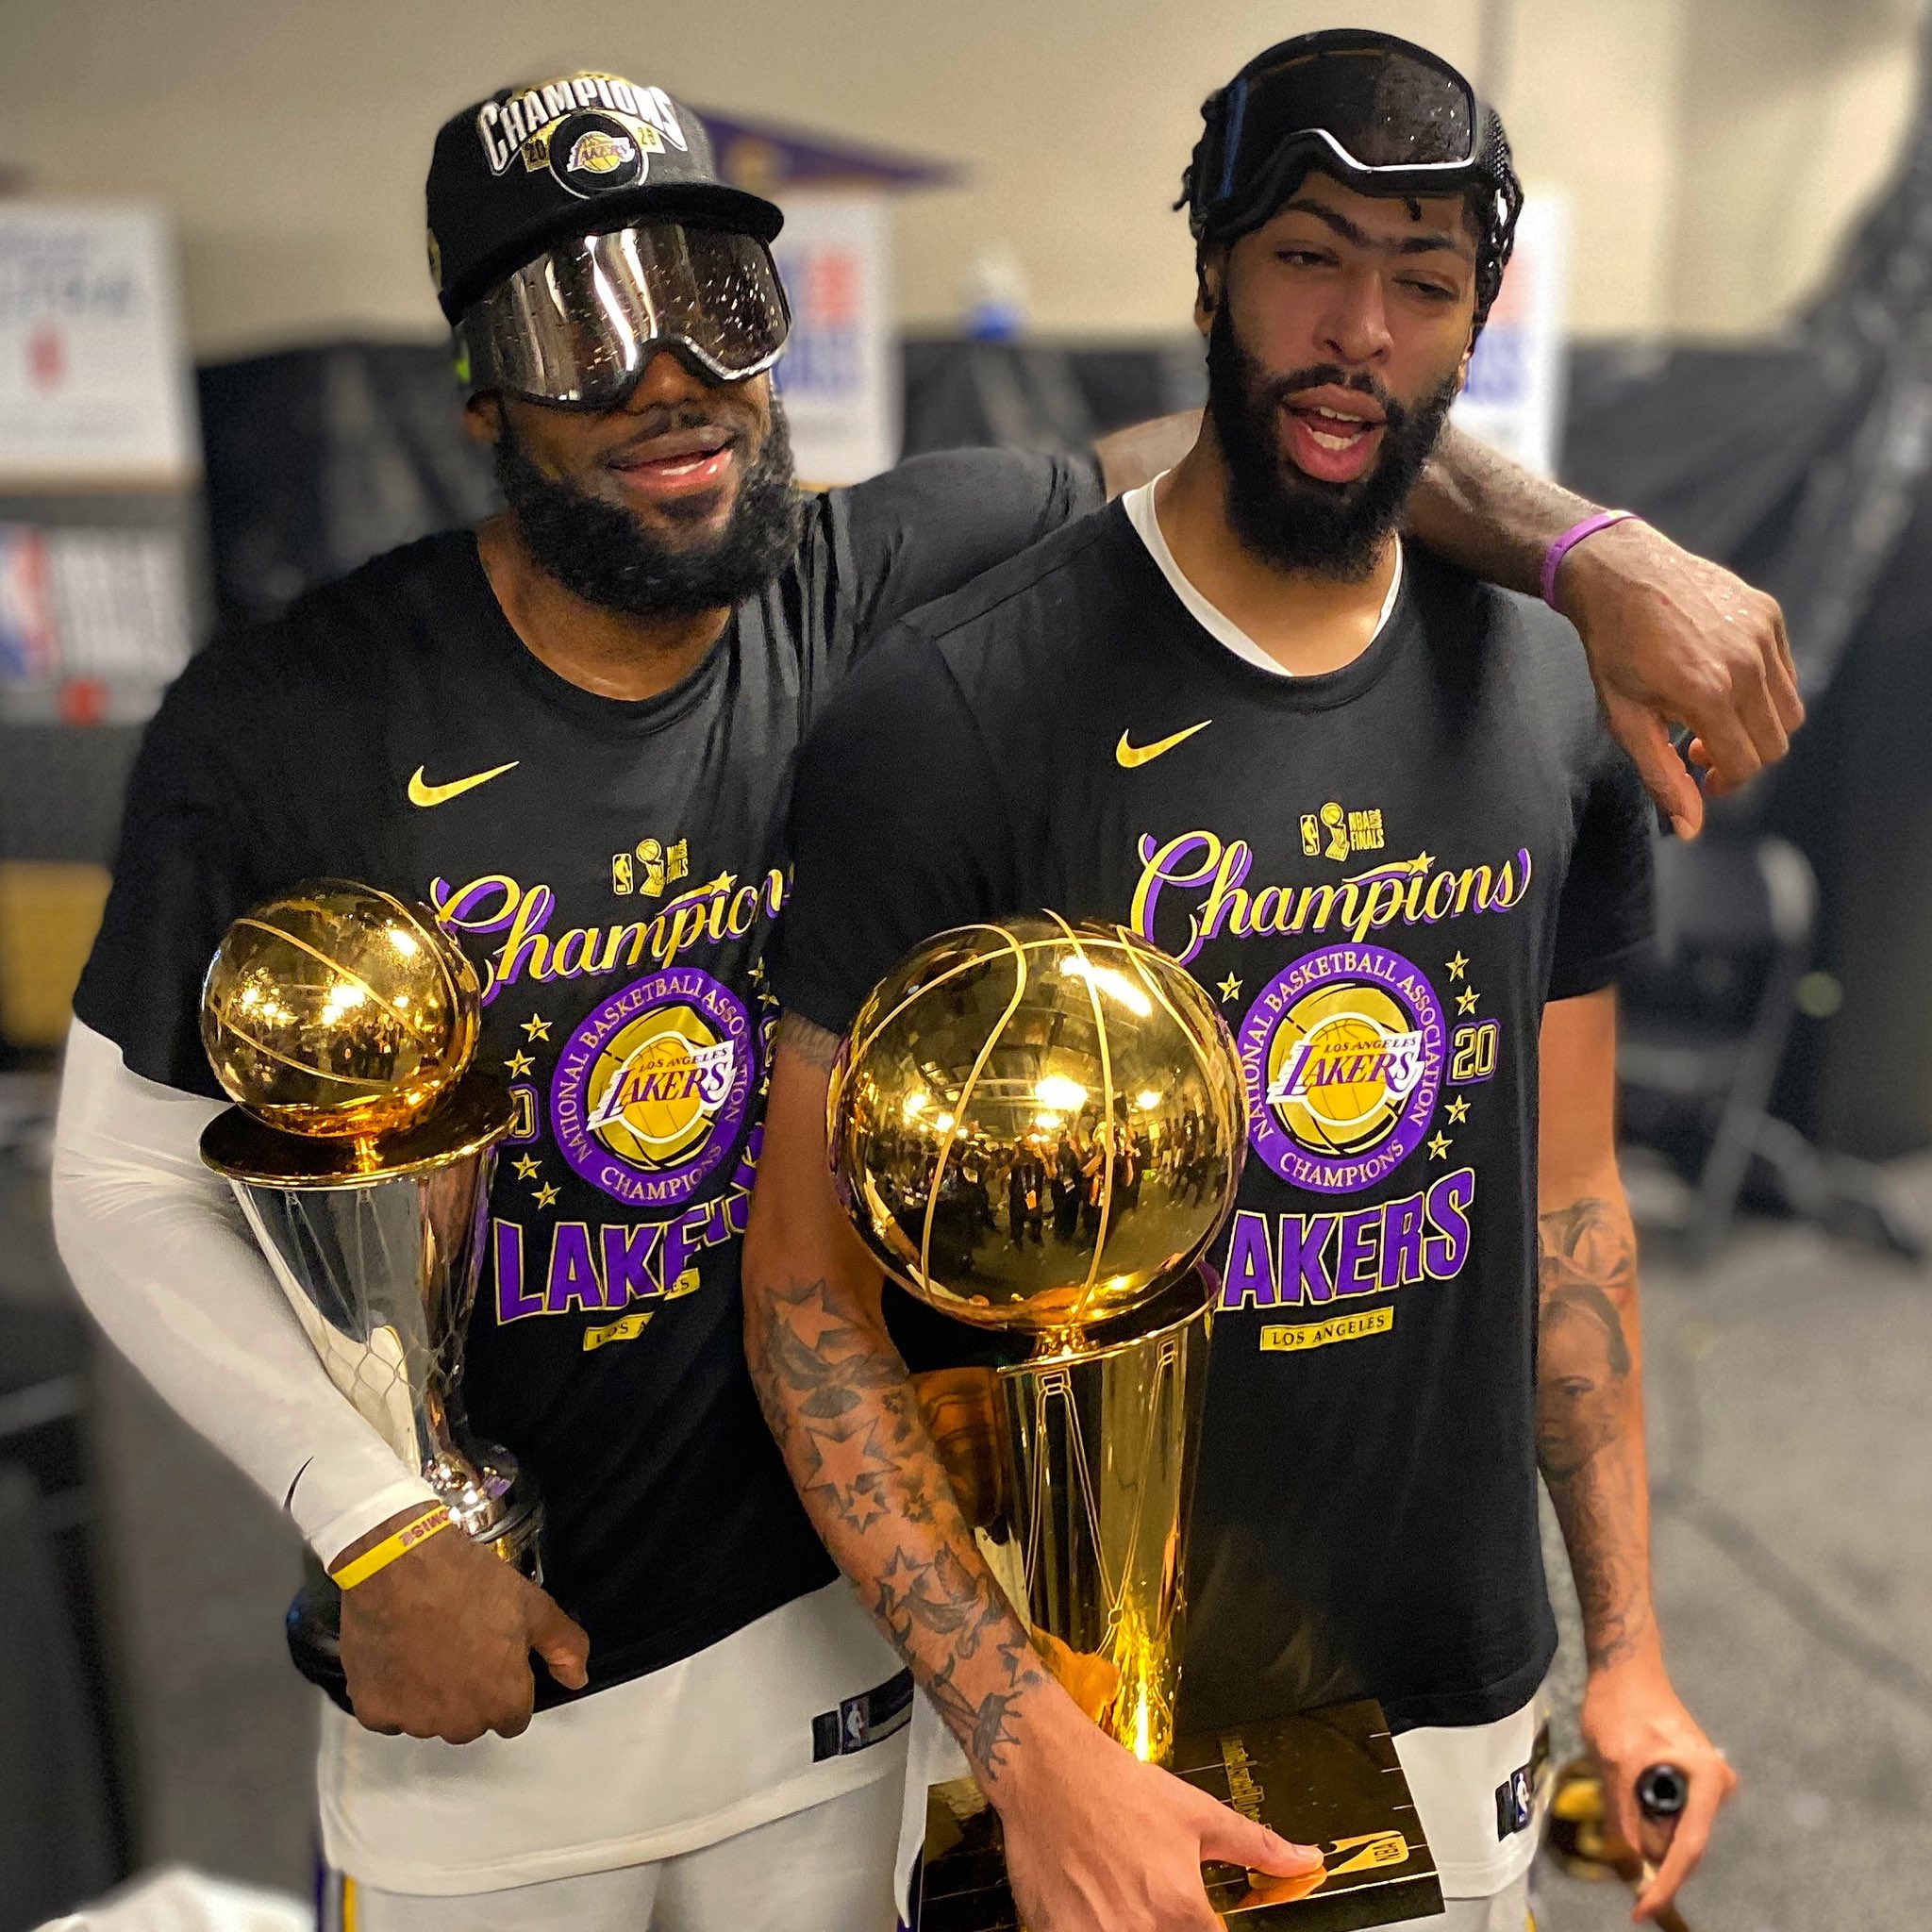 NBA Finals: Lakers trounce Heat 106-93 in Game 6 to win 17th NBA championship - THE SPORTS ROOM